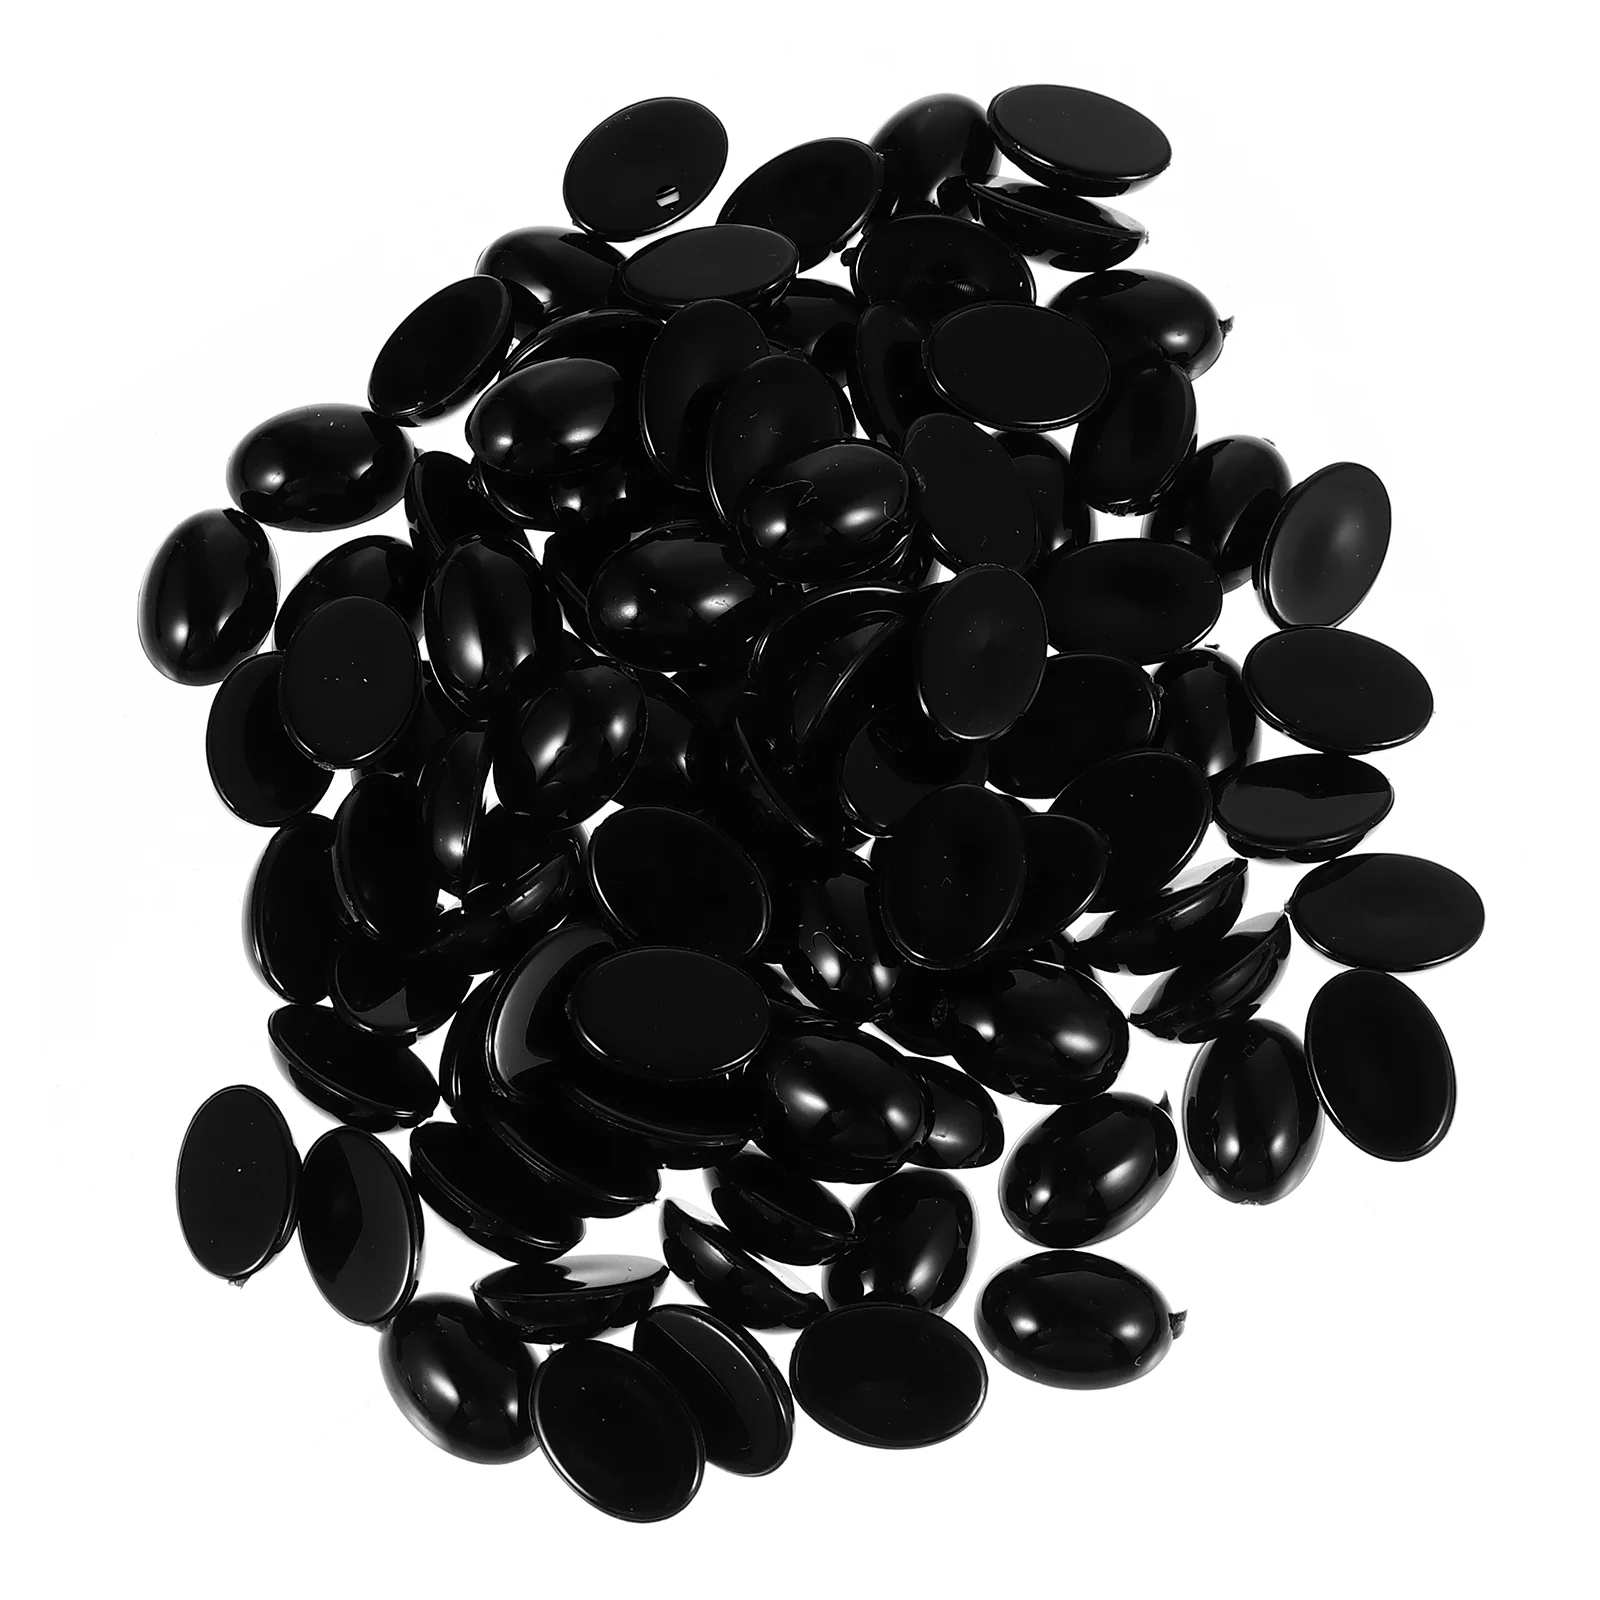 

100 Pcs Black Baby Toy Nose Plastic Eye for Bear DIY Craft Accessories Decorate Decorative Oval Design Supplies